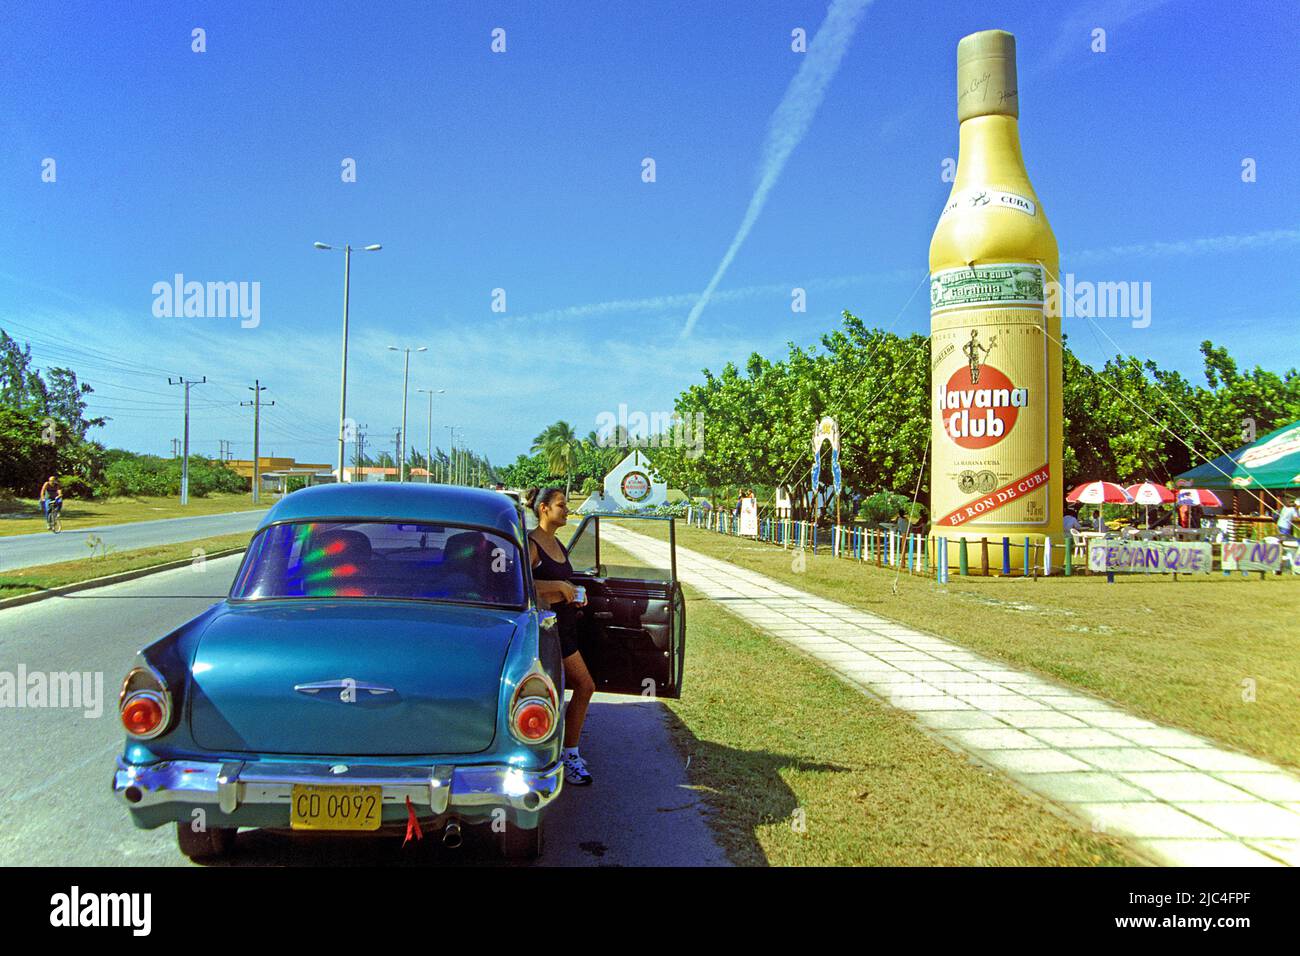 Cuban girl gets out of a vintage car, big plastic Havana Club rum bottle, rum advertising at a  Fiesta, St. Lucia, Cuba, Caribbean Stock Photo